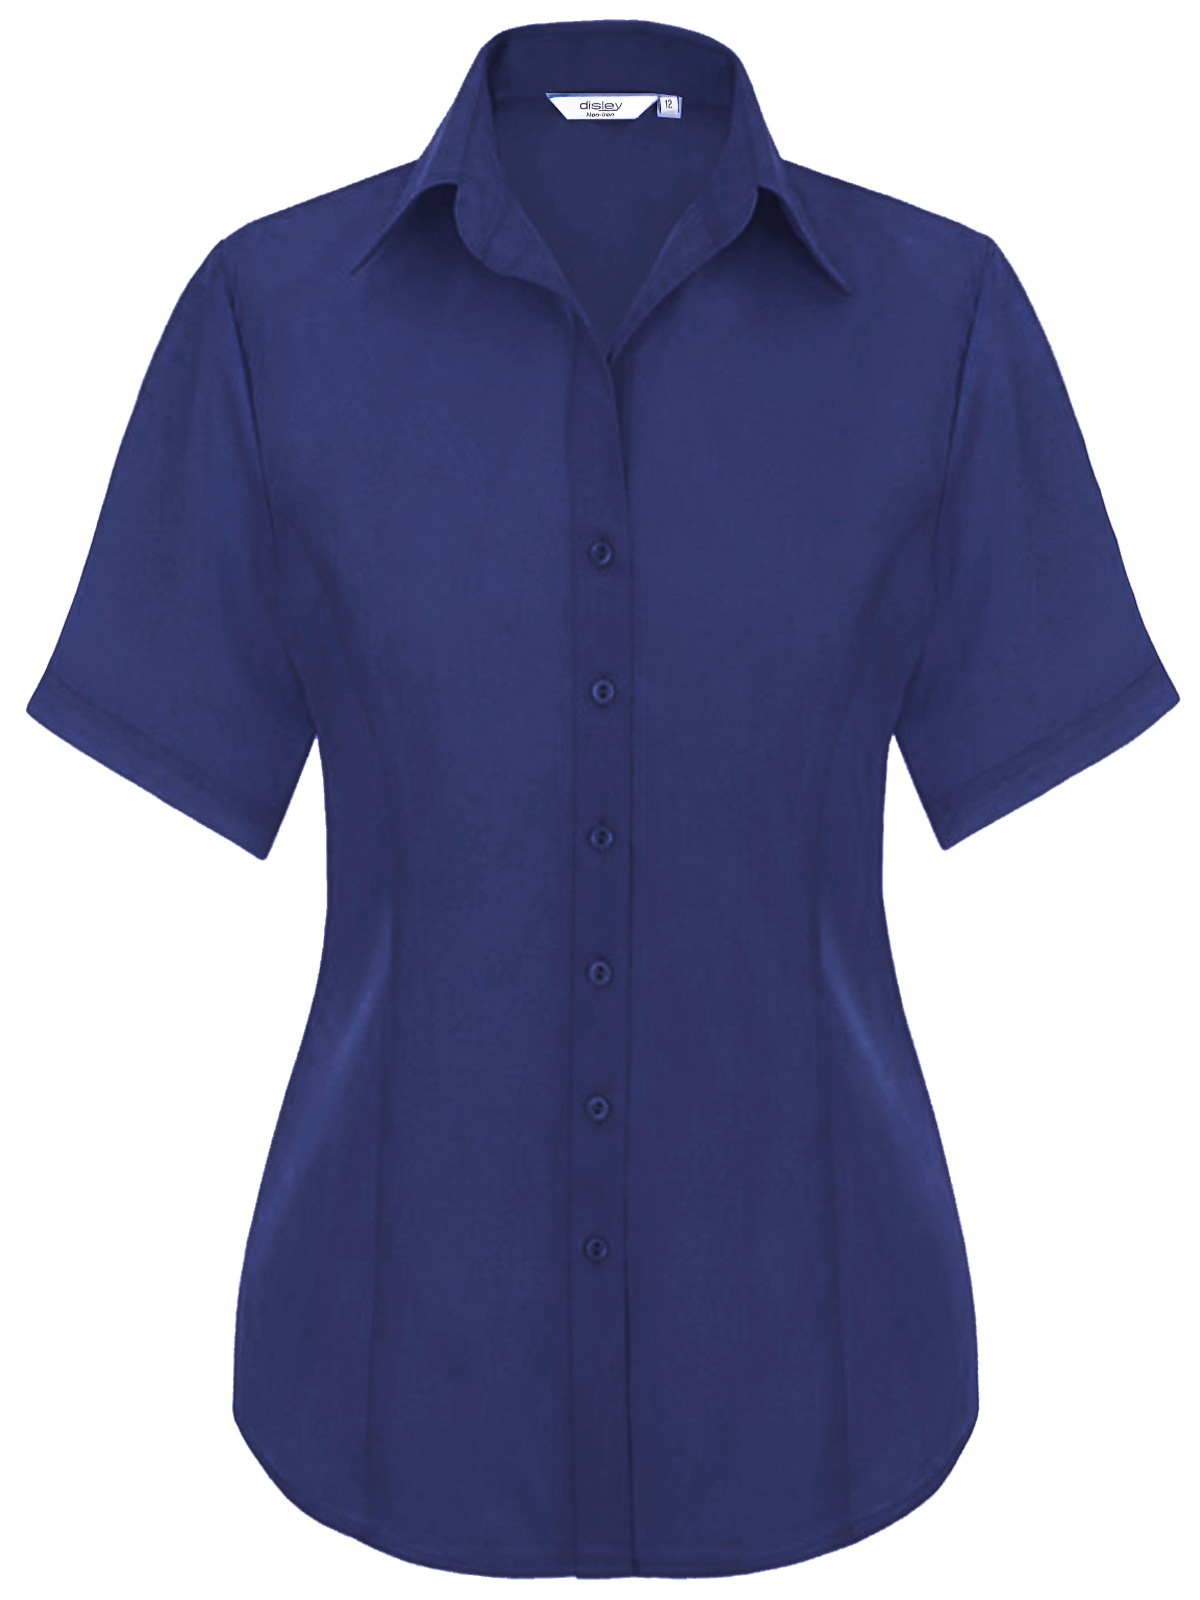 Disley - - Disley FRENCH BLUE Cara Short Sleeve Easy Care Blouse - Size ...